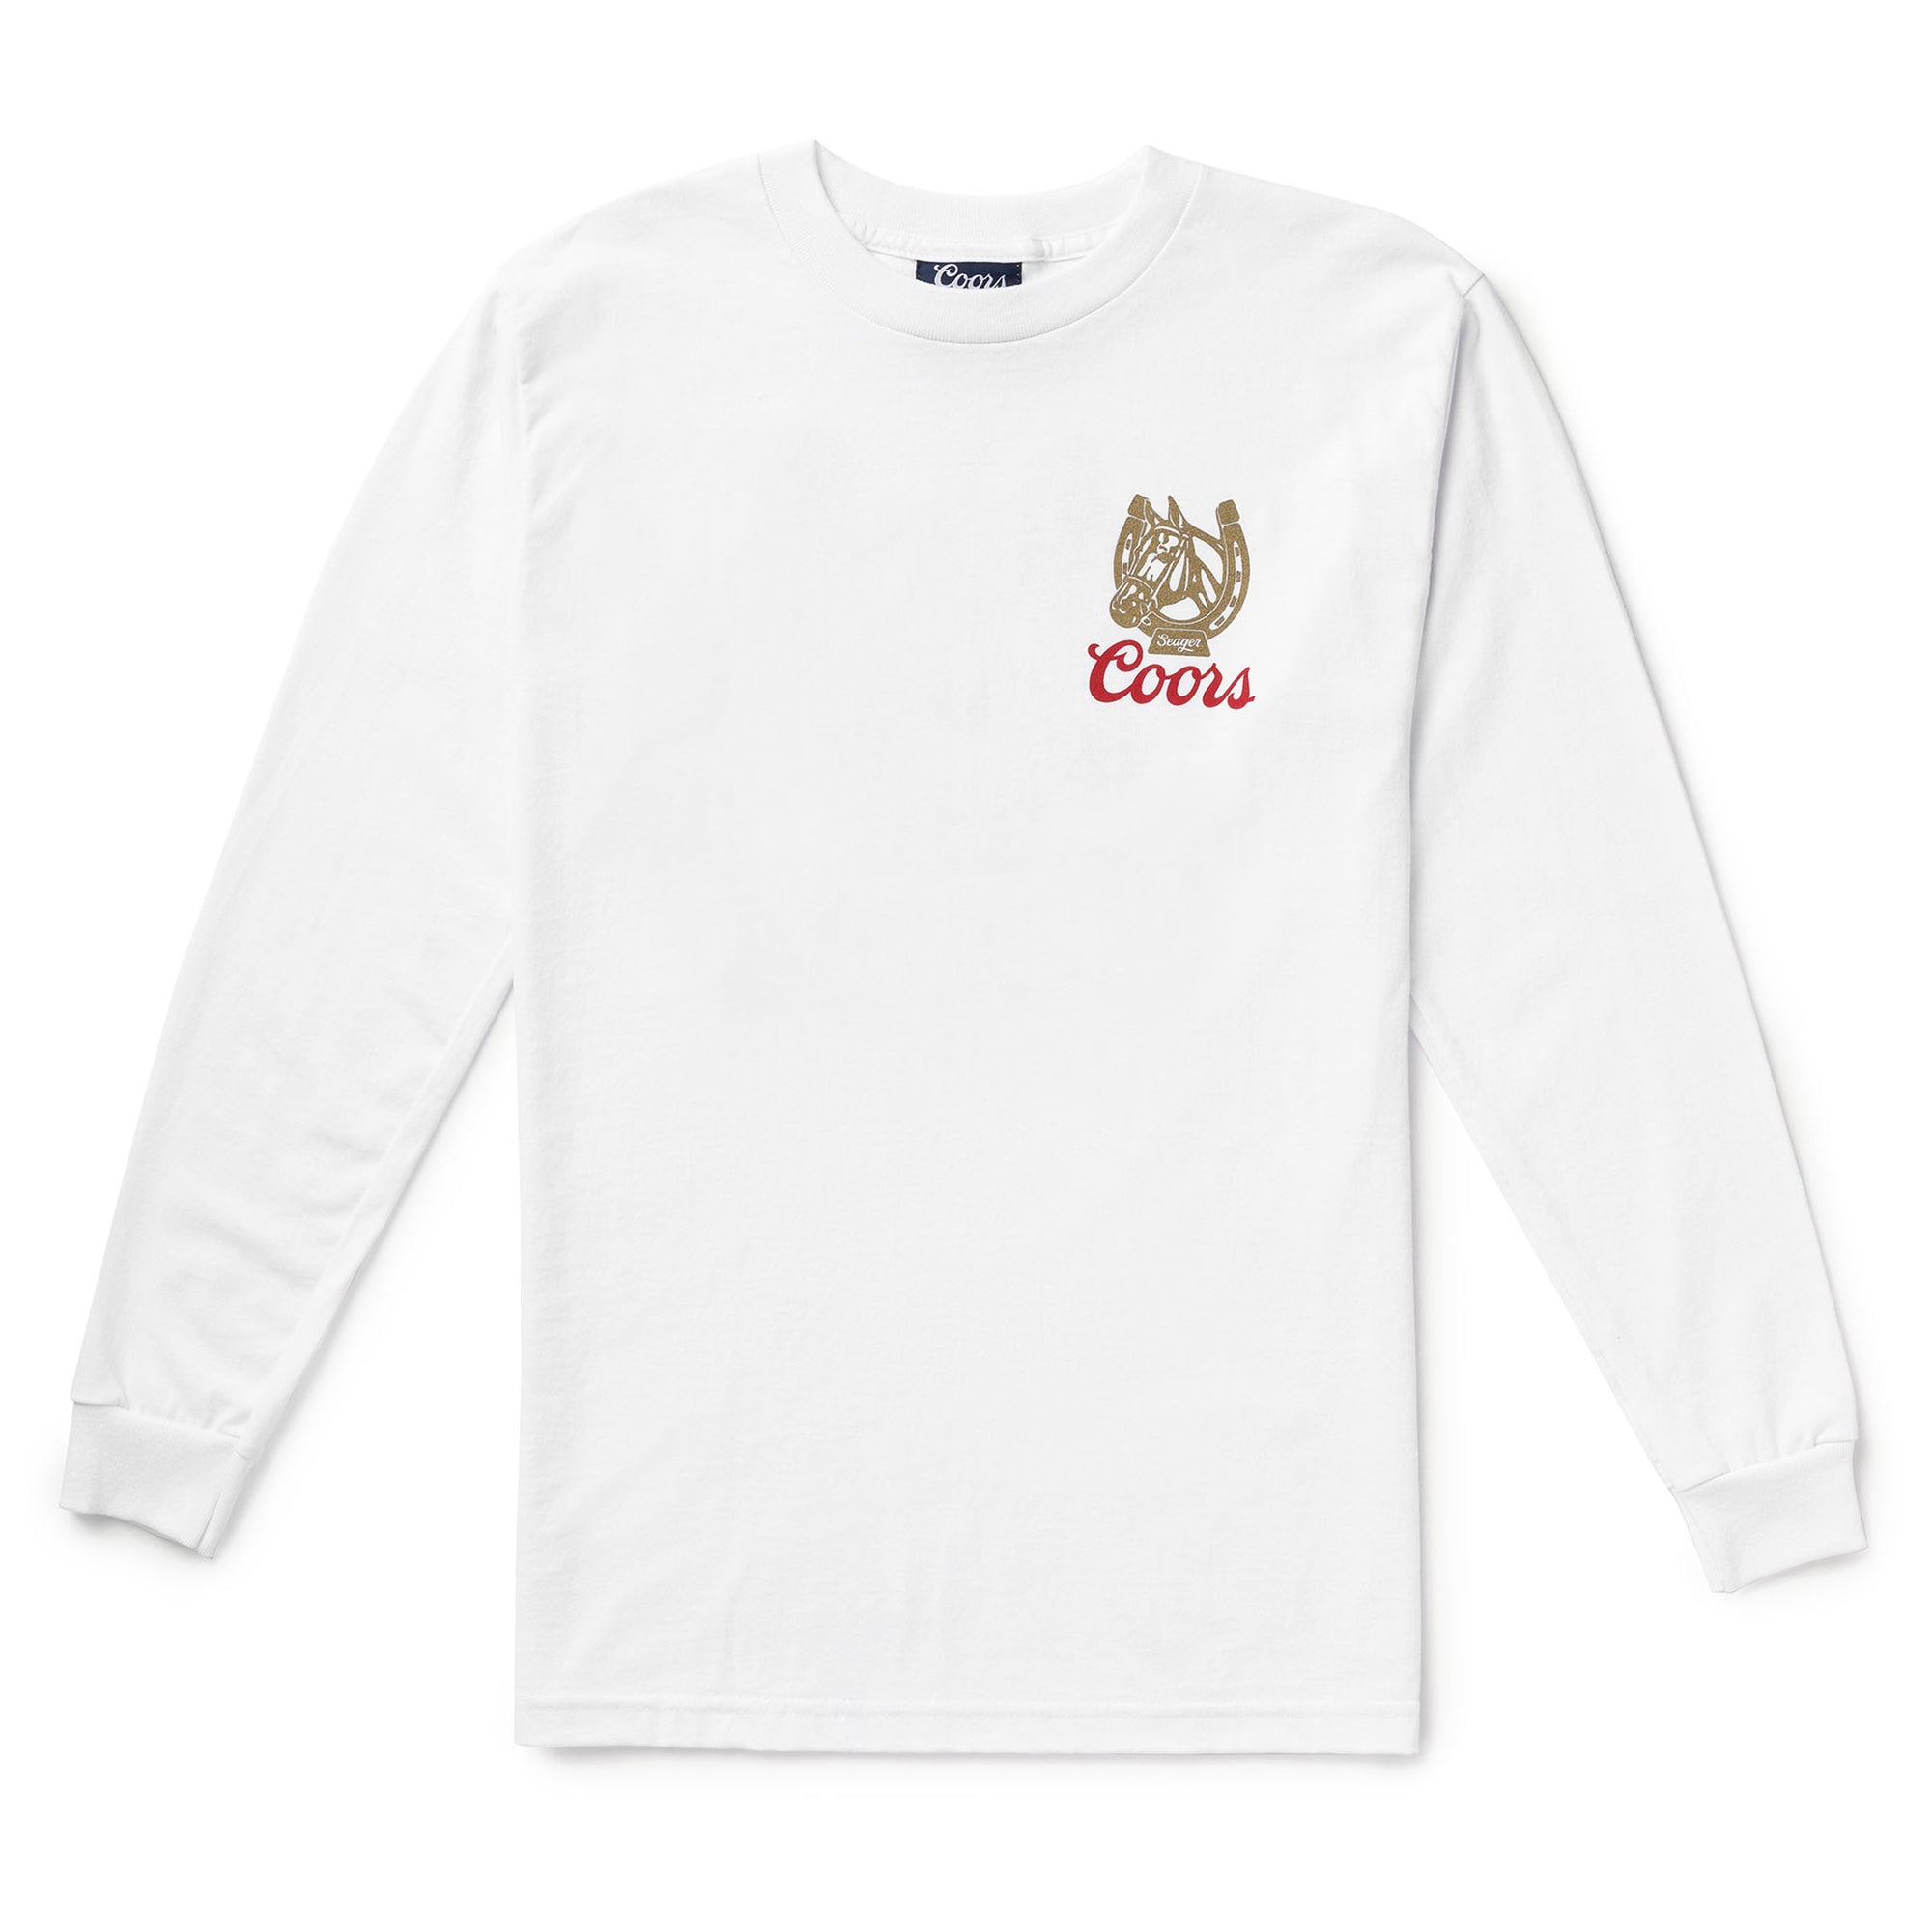 Seager x Coors Banquet Legacy L/S Tee - White